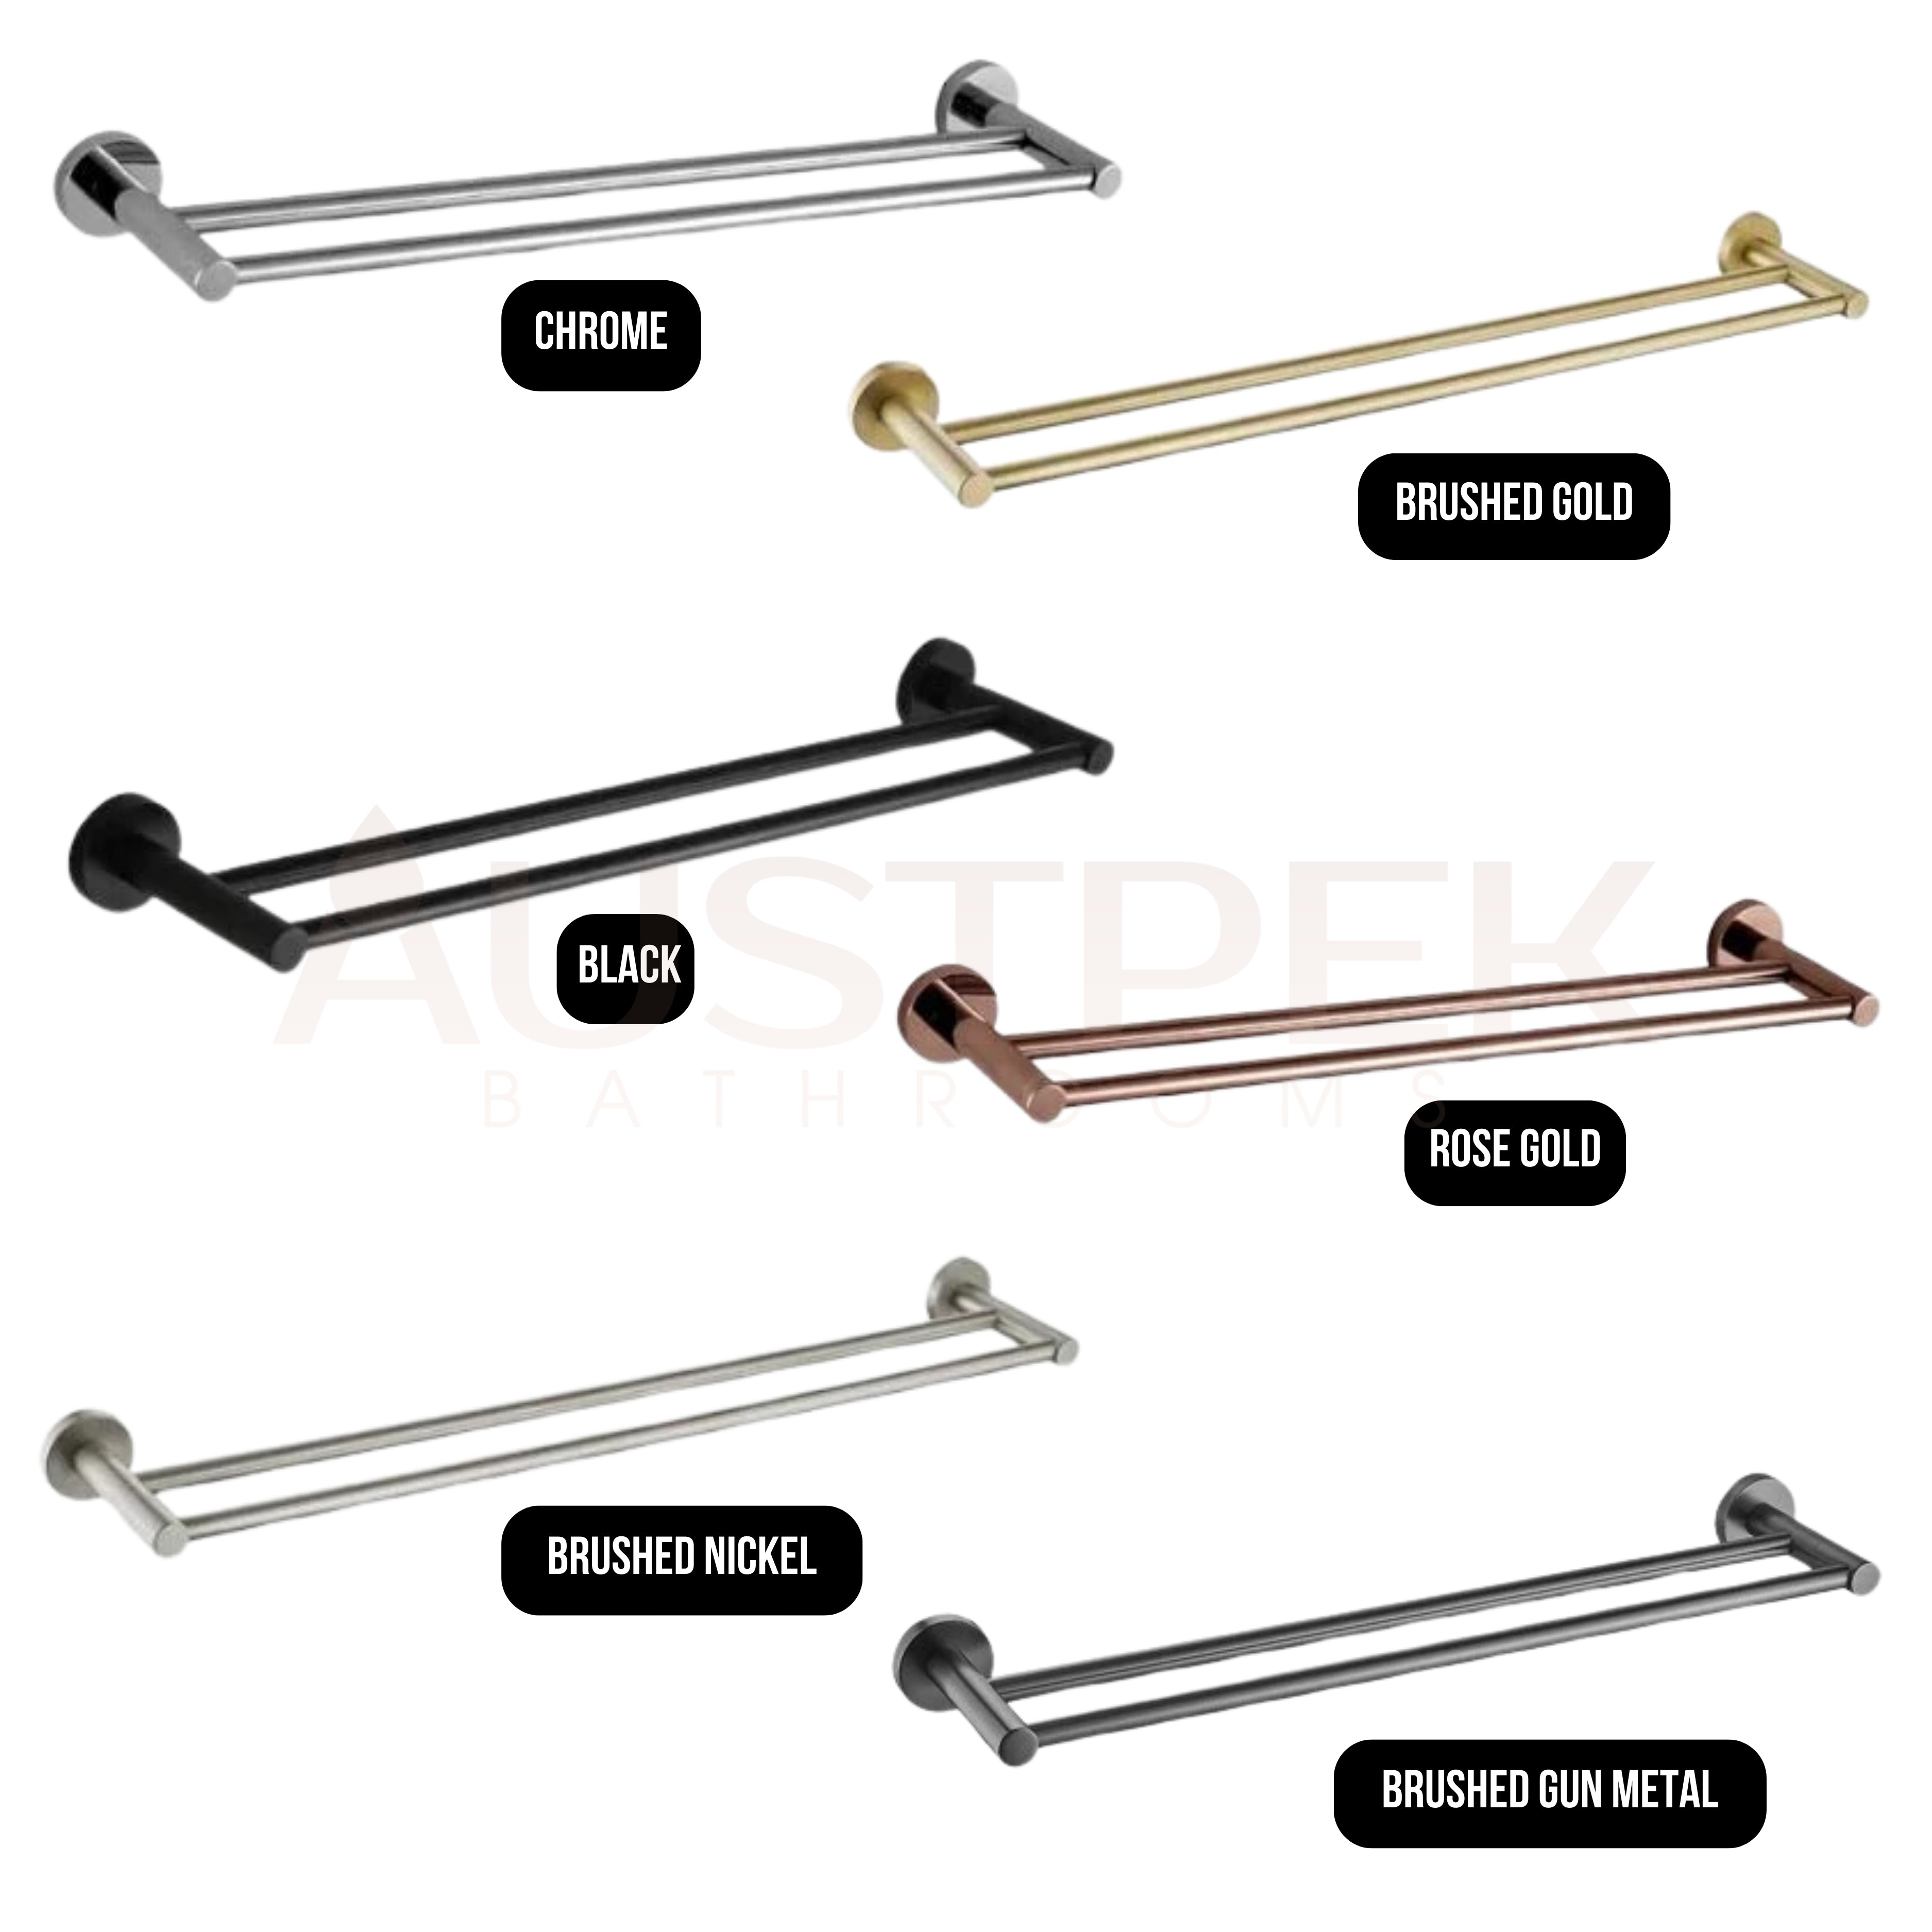 HELLYCAR IDEAL DOUBLE NON-HEATED TOWEL RAIL BRUSHED GOLD 600MM, 750MM AND 900MM